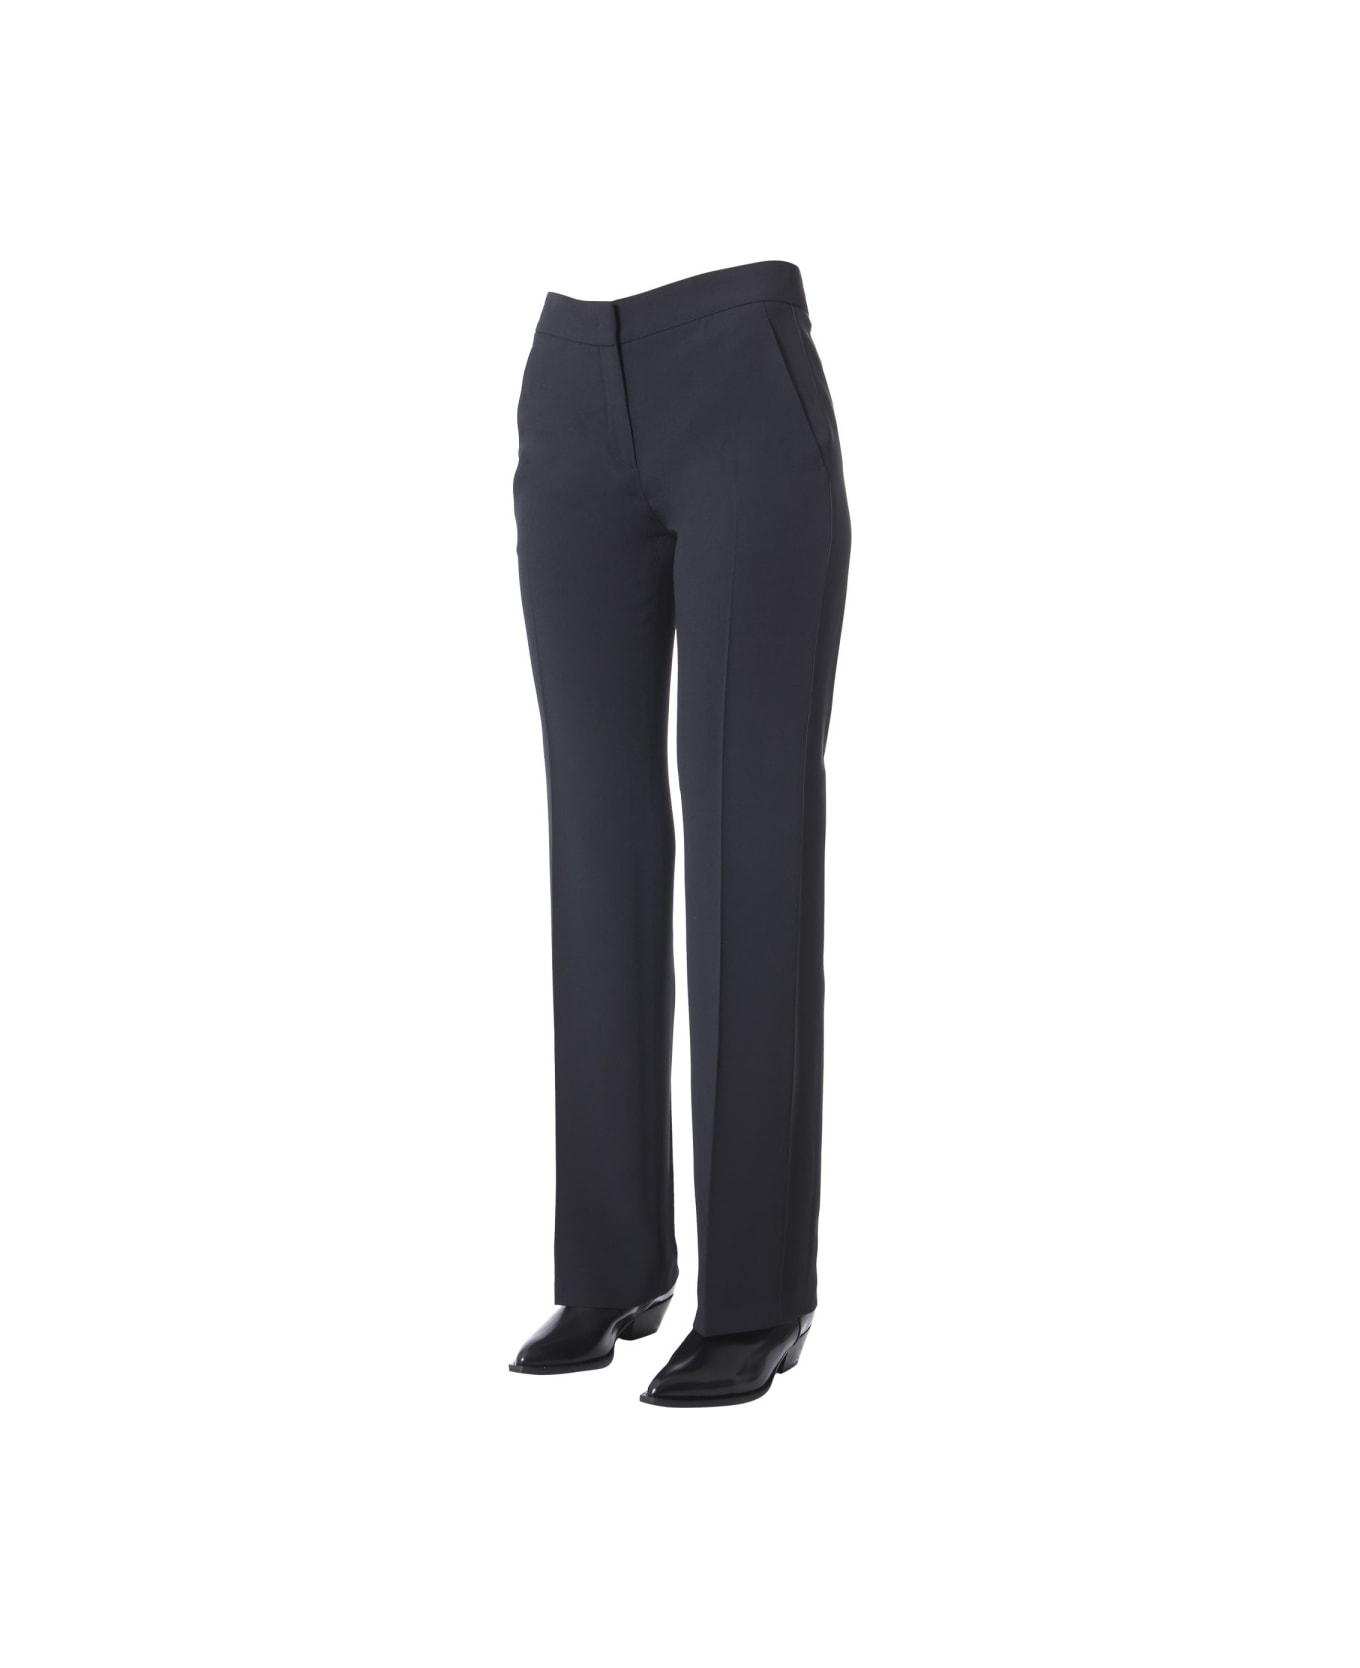 N.21 Pants With Side Band - BLACK